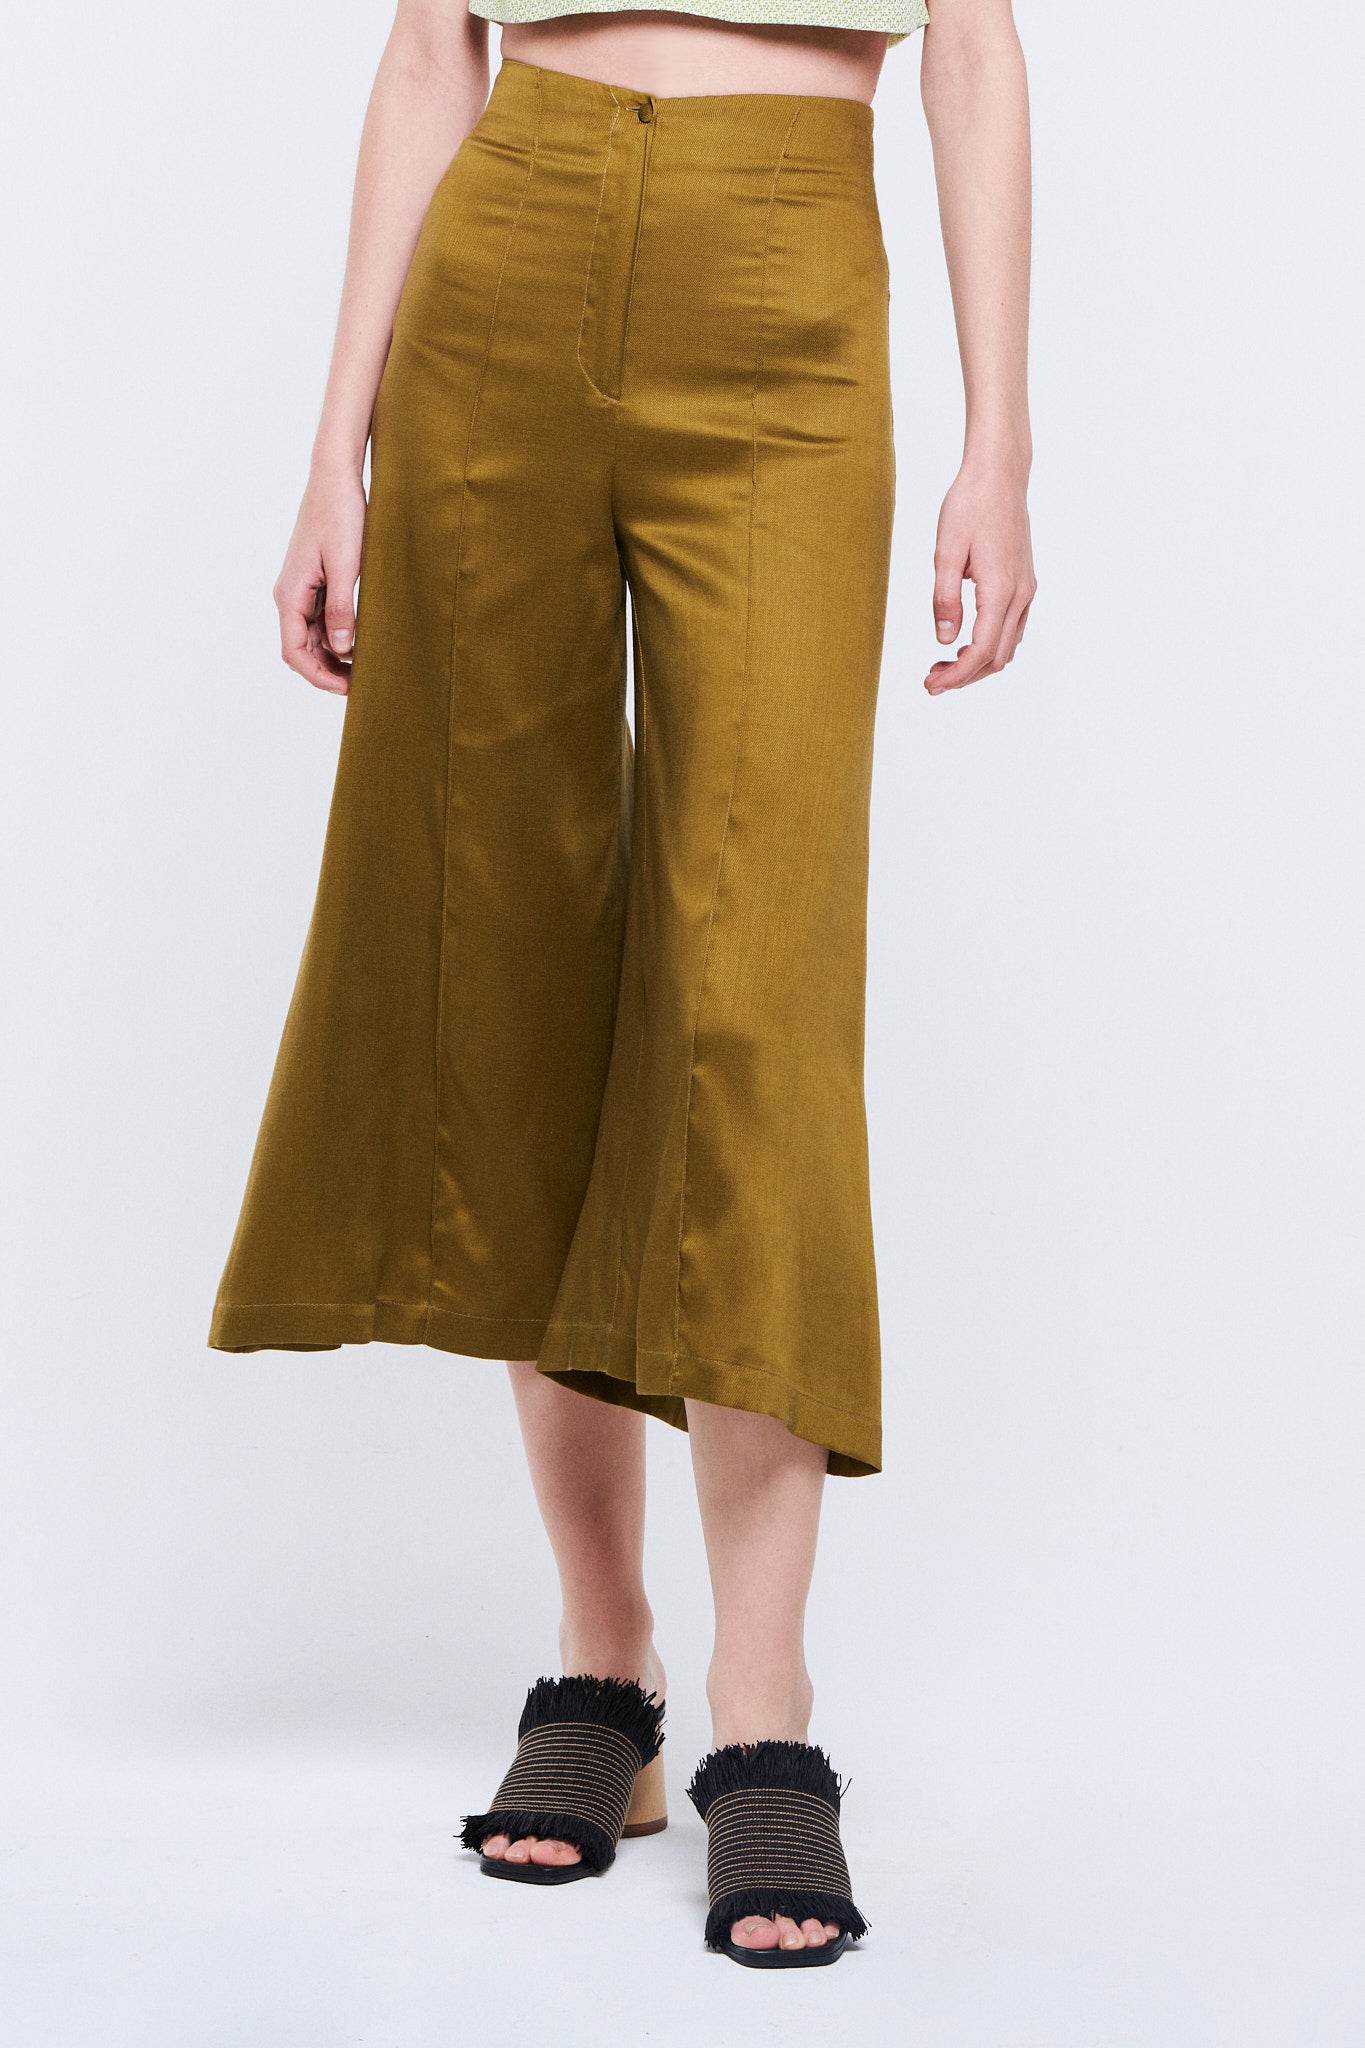 Olive green trousers